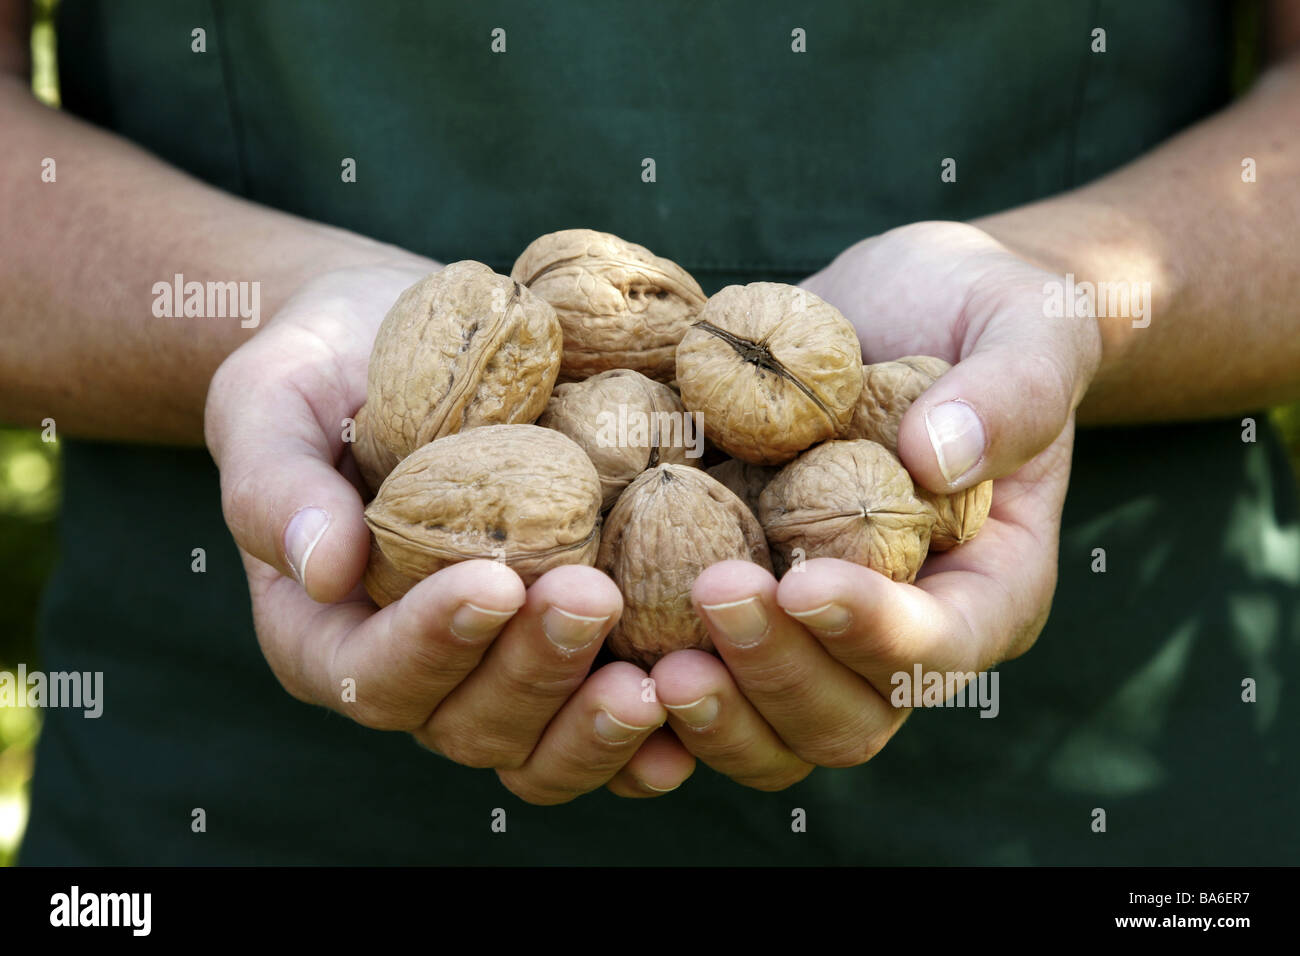 Garden woman garden-apron detail hands walnuts harvested presents autumn agriculture gardening gardener apron with pride fruits Stock Photo